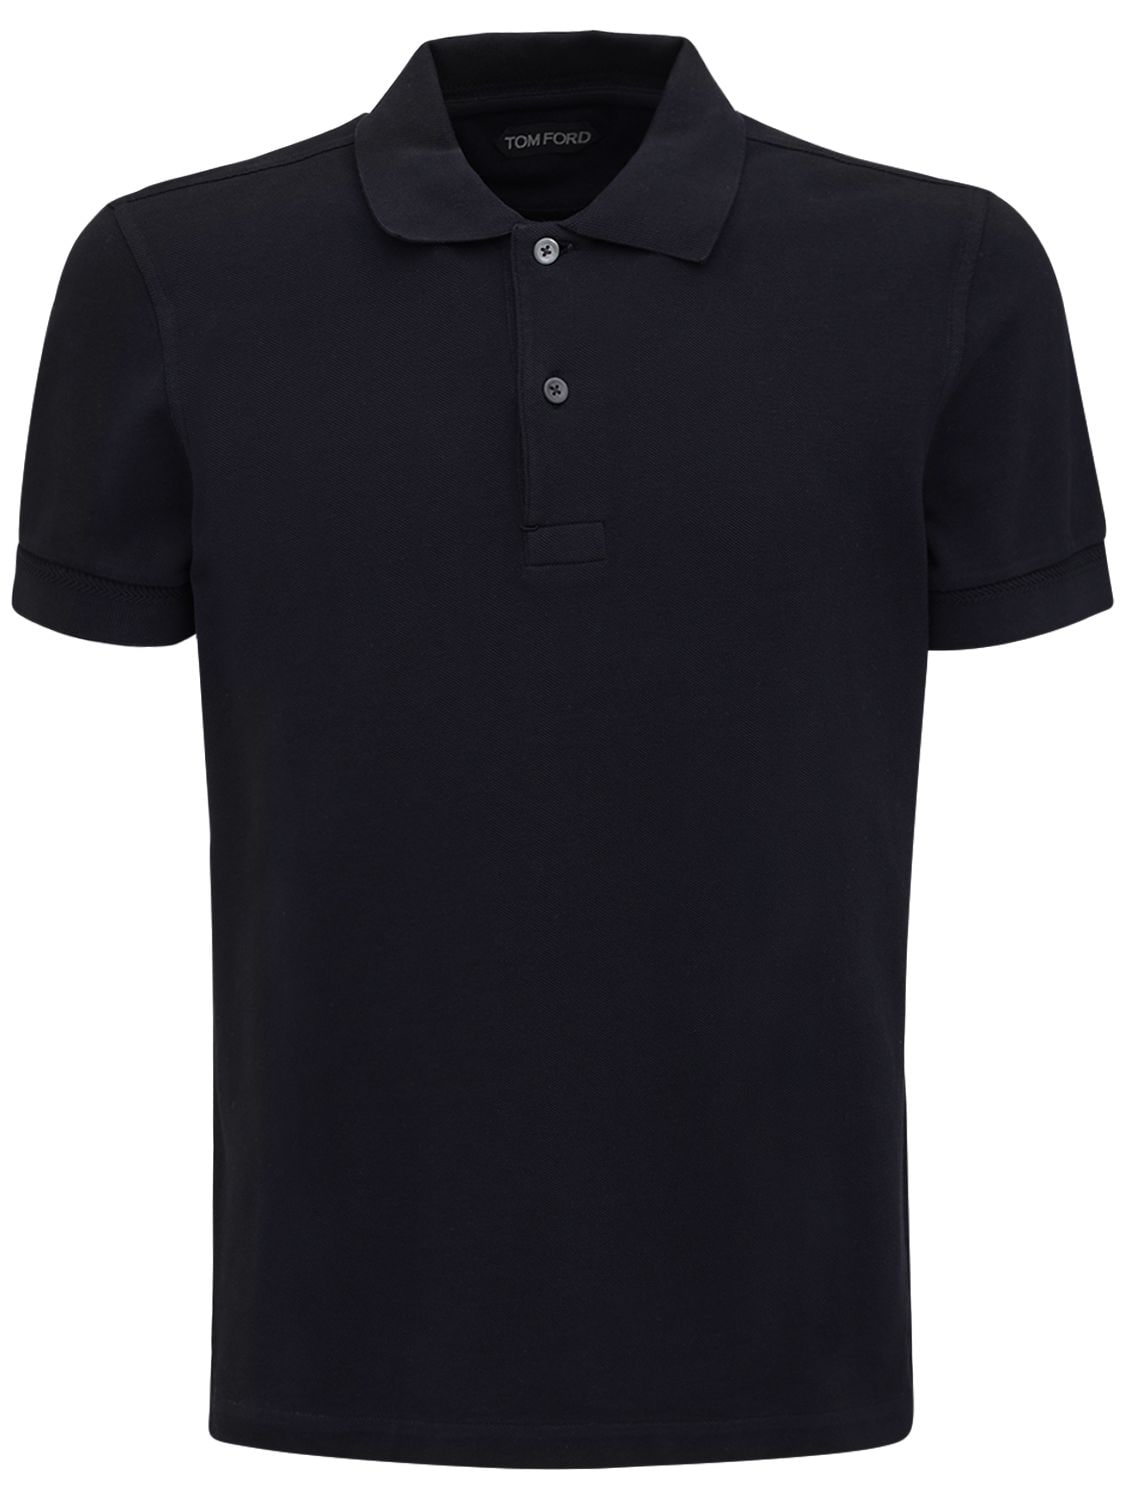 Tom Ford Men's Tennis Pique Garment-dyed Polo In Black